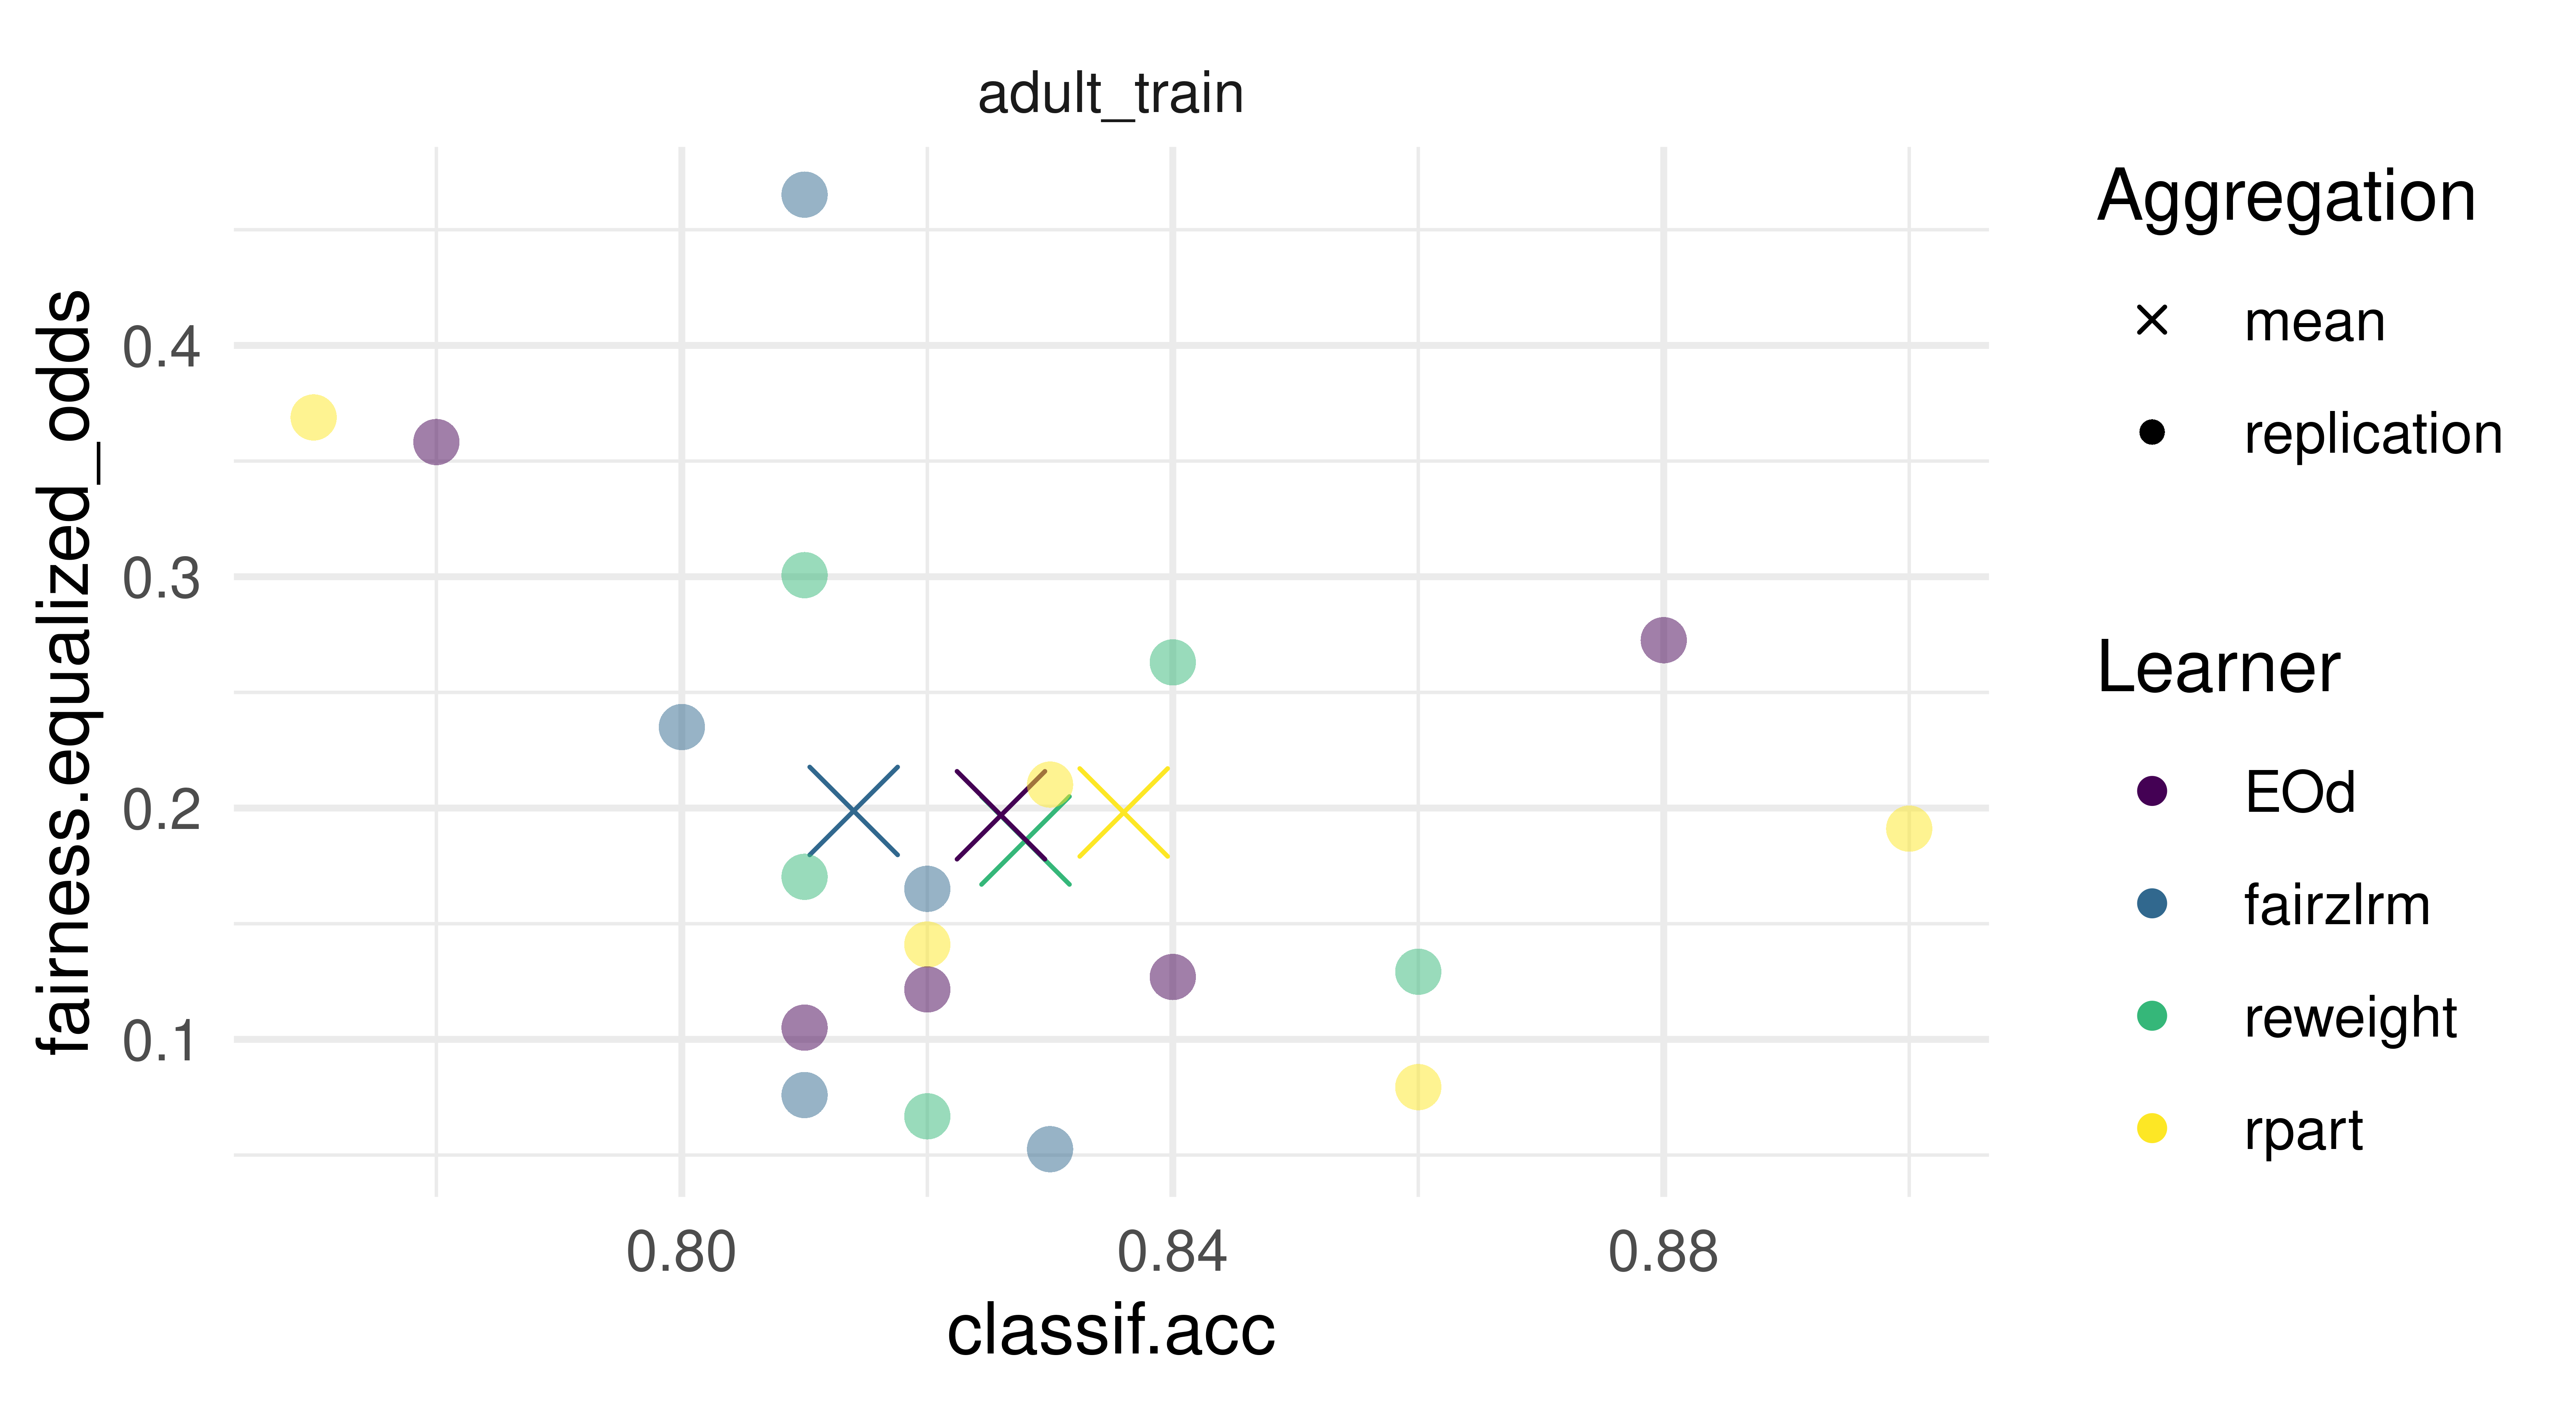 Scatterplot with dots and crosses. x-axis is 'classif.acc' between 0.75 and 0.89, y-axis is 'fairness.equalized_odds' between 0 and 0.4. Plot results described in text.